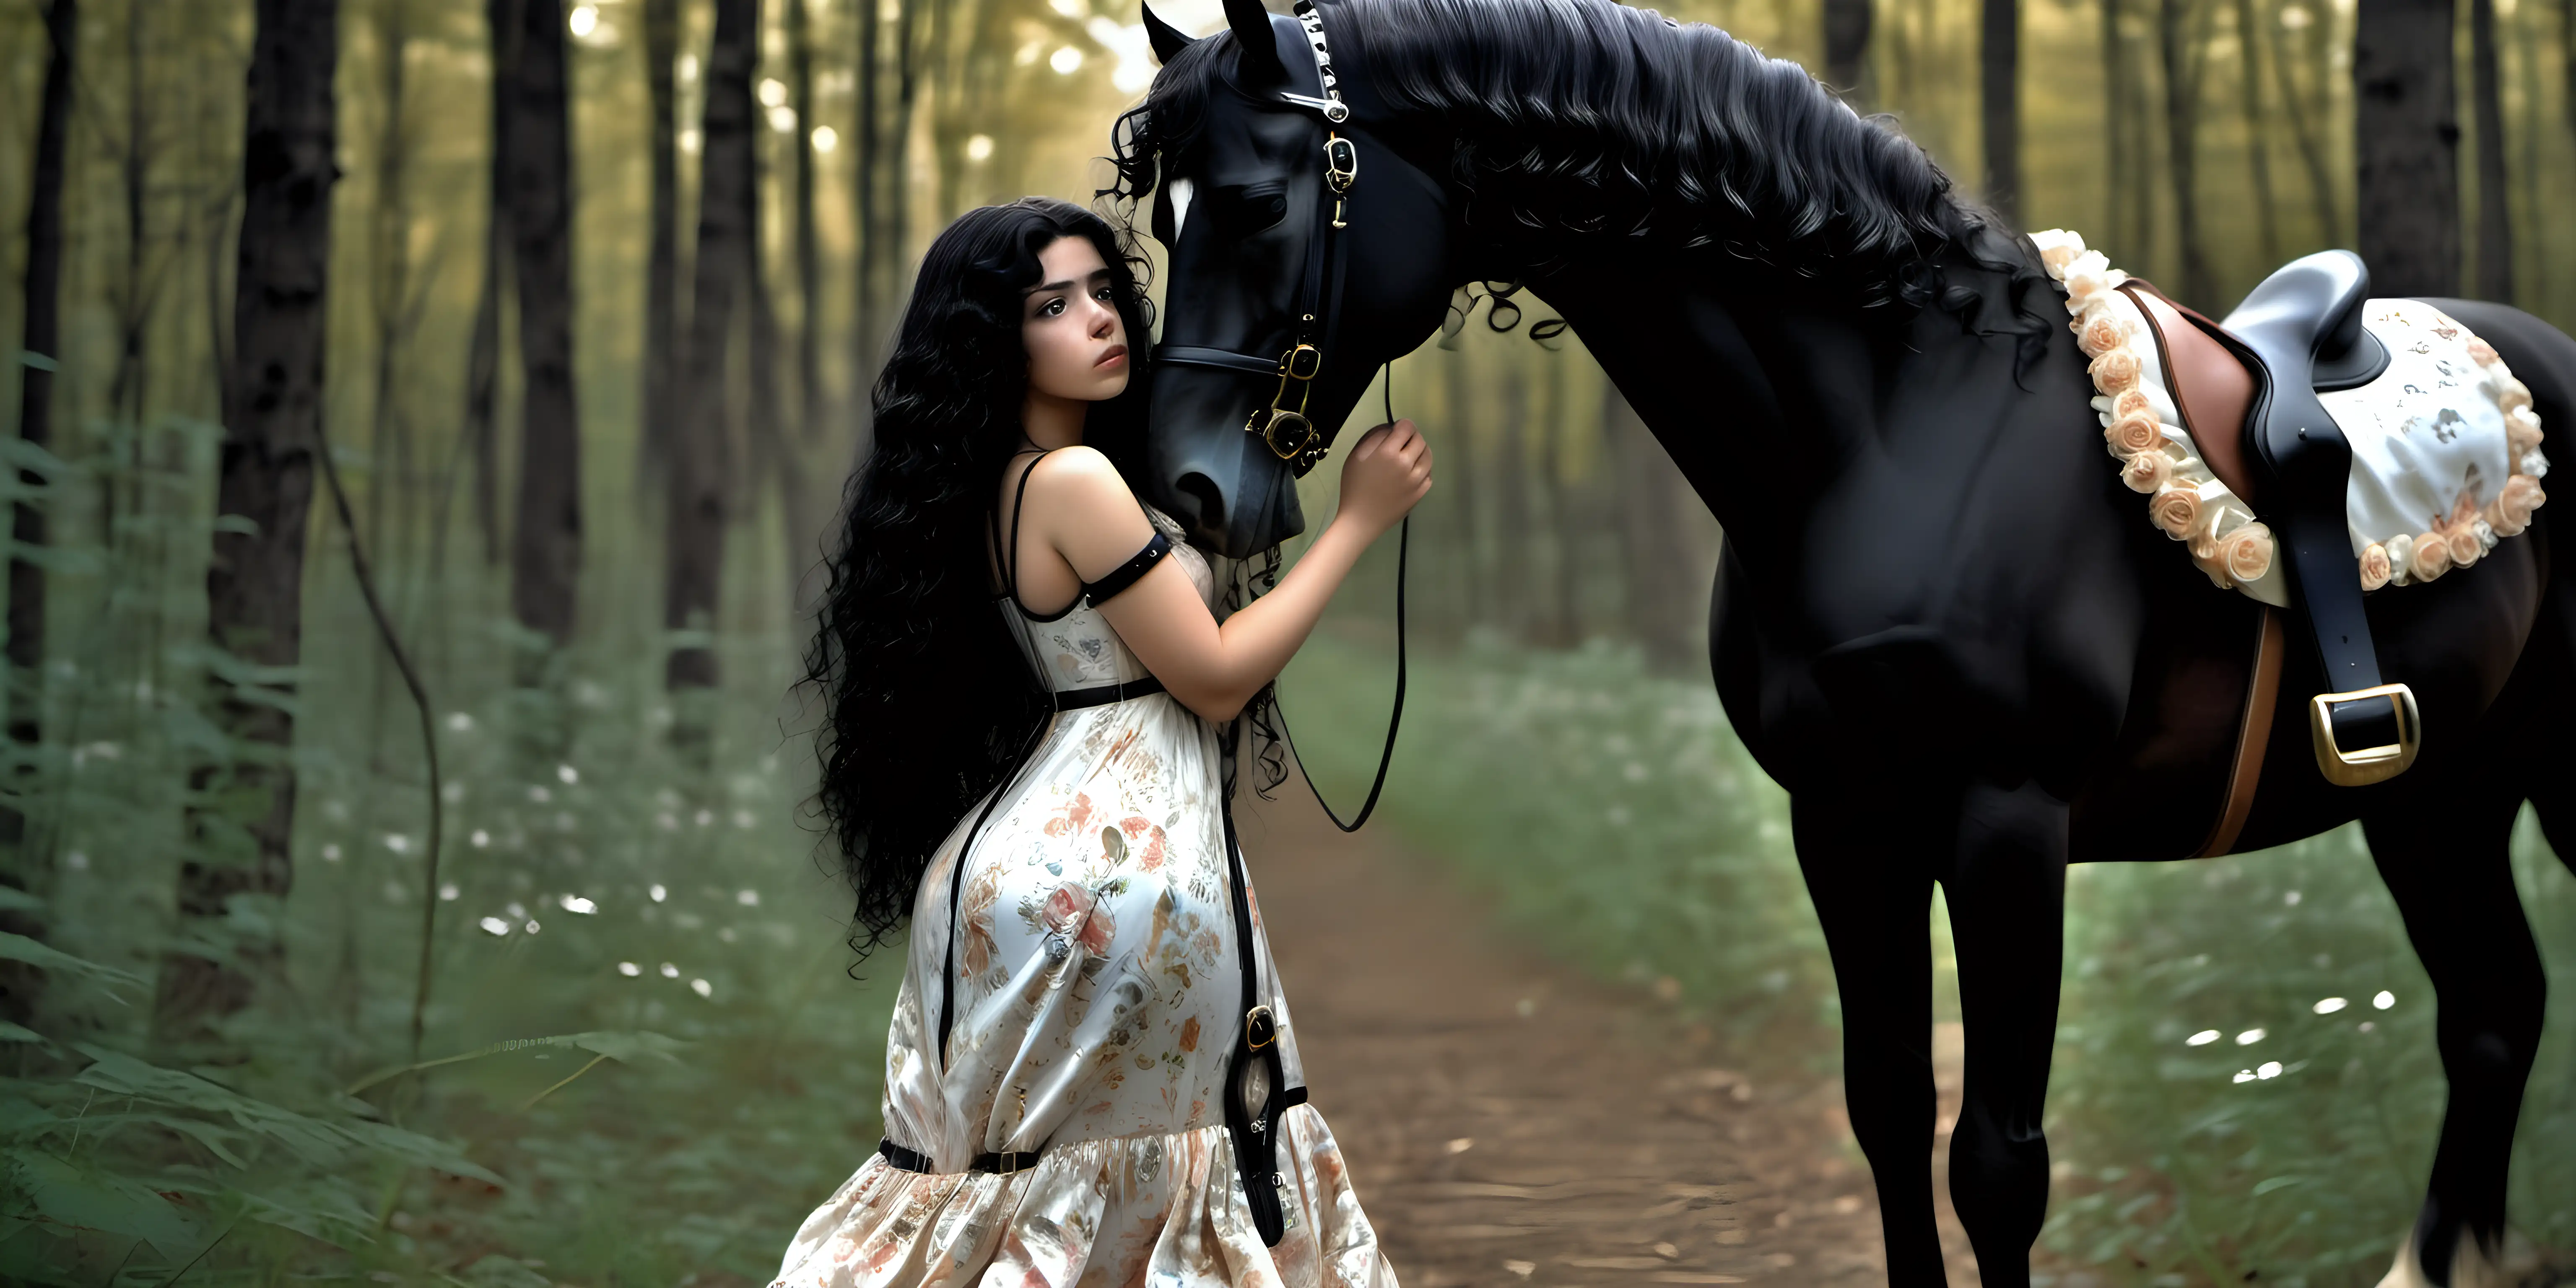 
In a forest a black long curly hair girl ,she has mascara & eyeliner, she is wearing wooden shoes with leather studded straps,her body is shaped like an hourglass, she wears a long floral dress  ,she hugs her bay coloured horse with a white blaze on it's  face & whispers her thoughts to the horse. 